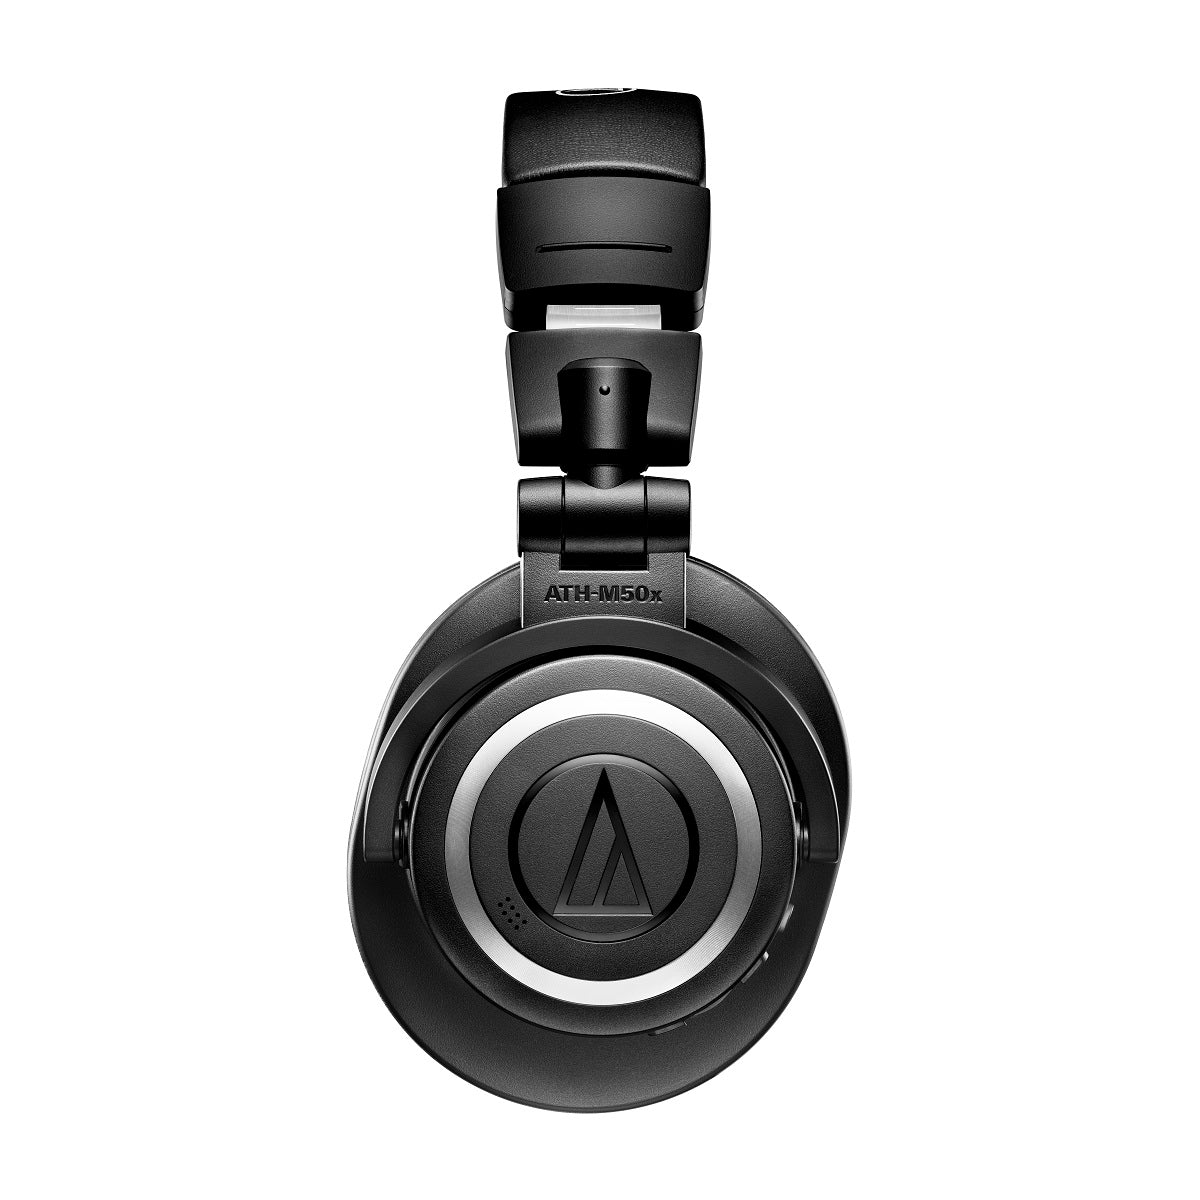 AudioTechnica ATH-M50xBT2 Wireless Over-Ear Headphones with Bluetooth (Black)